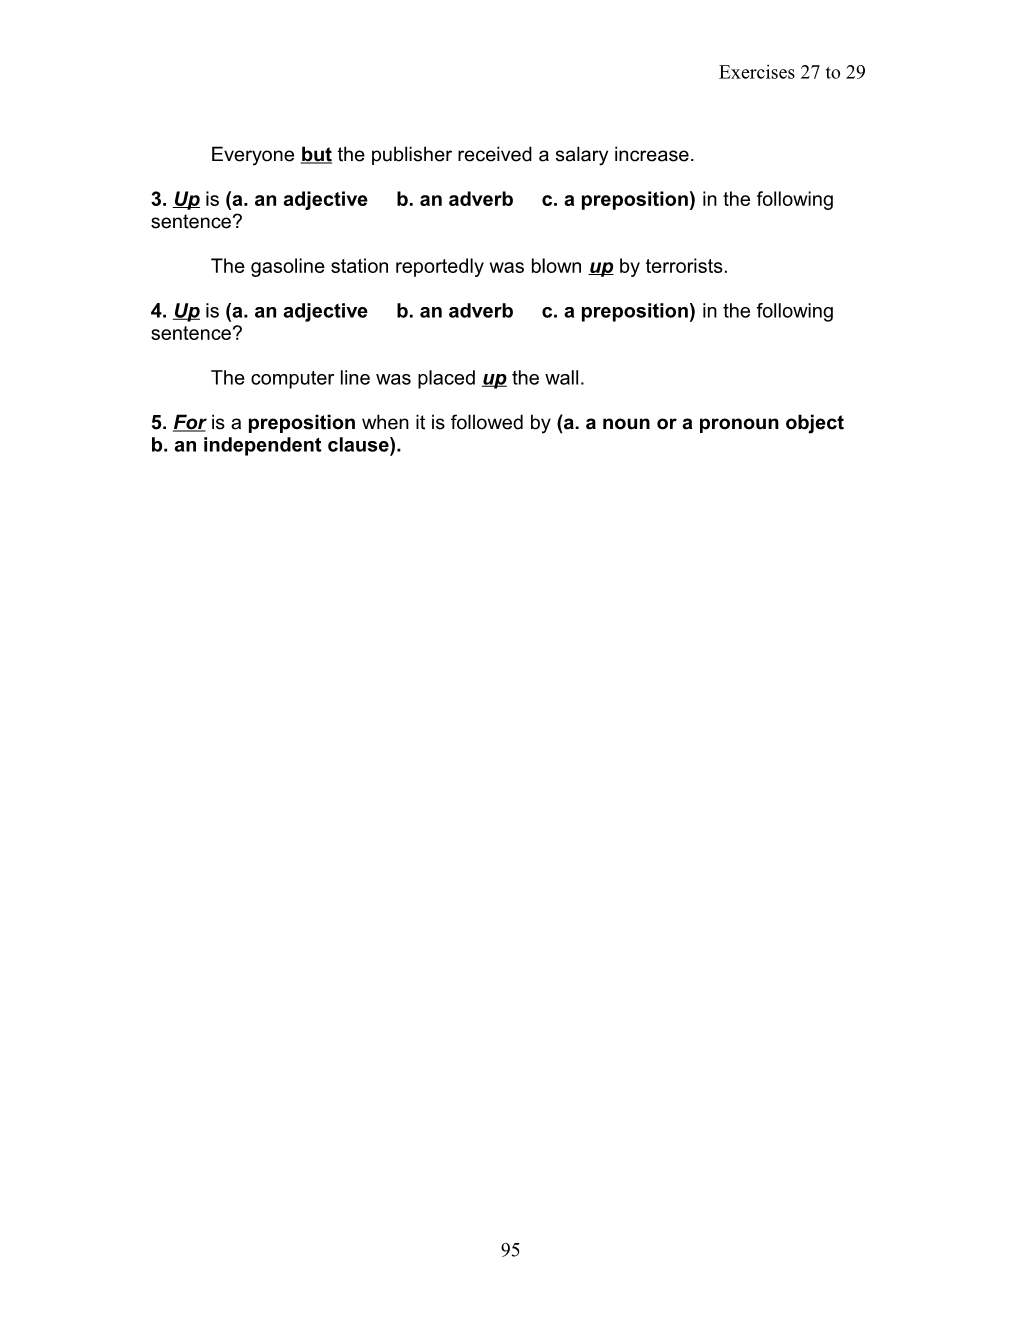 Exercise 27, Chapter 15, Prepositions